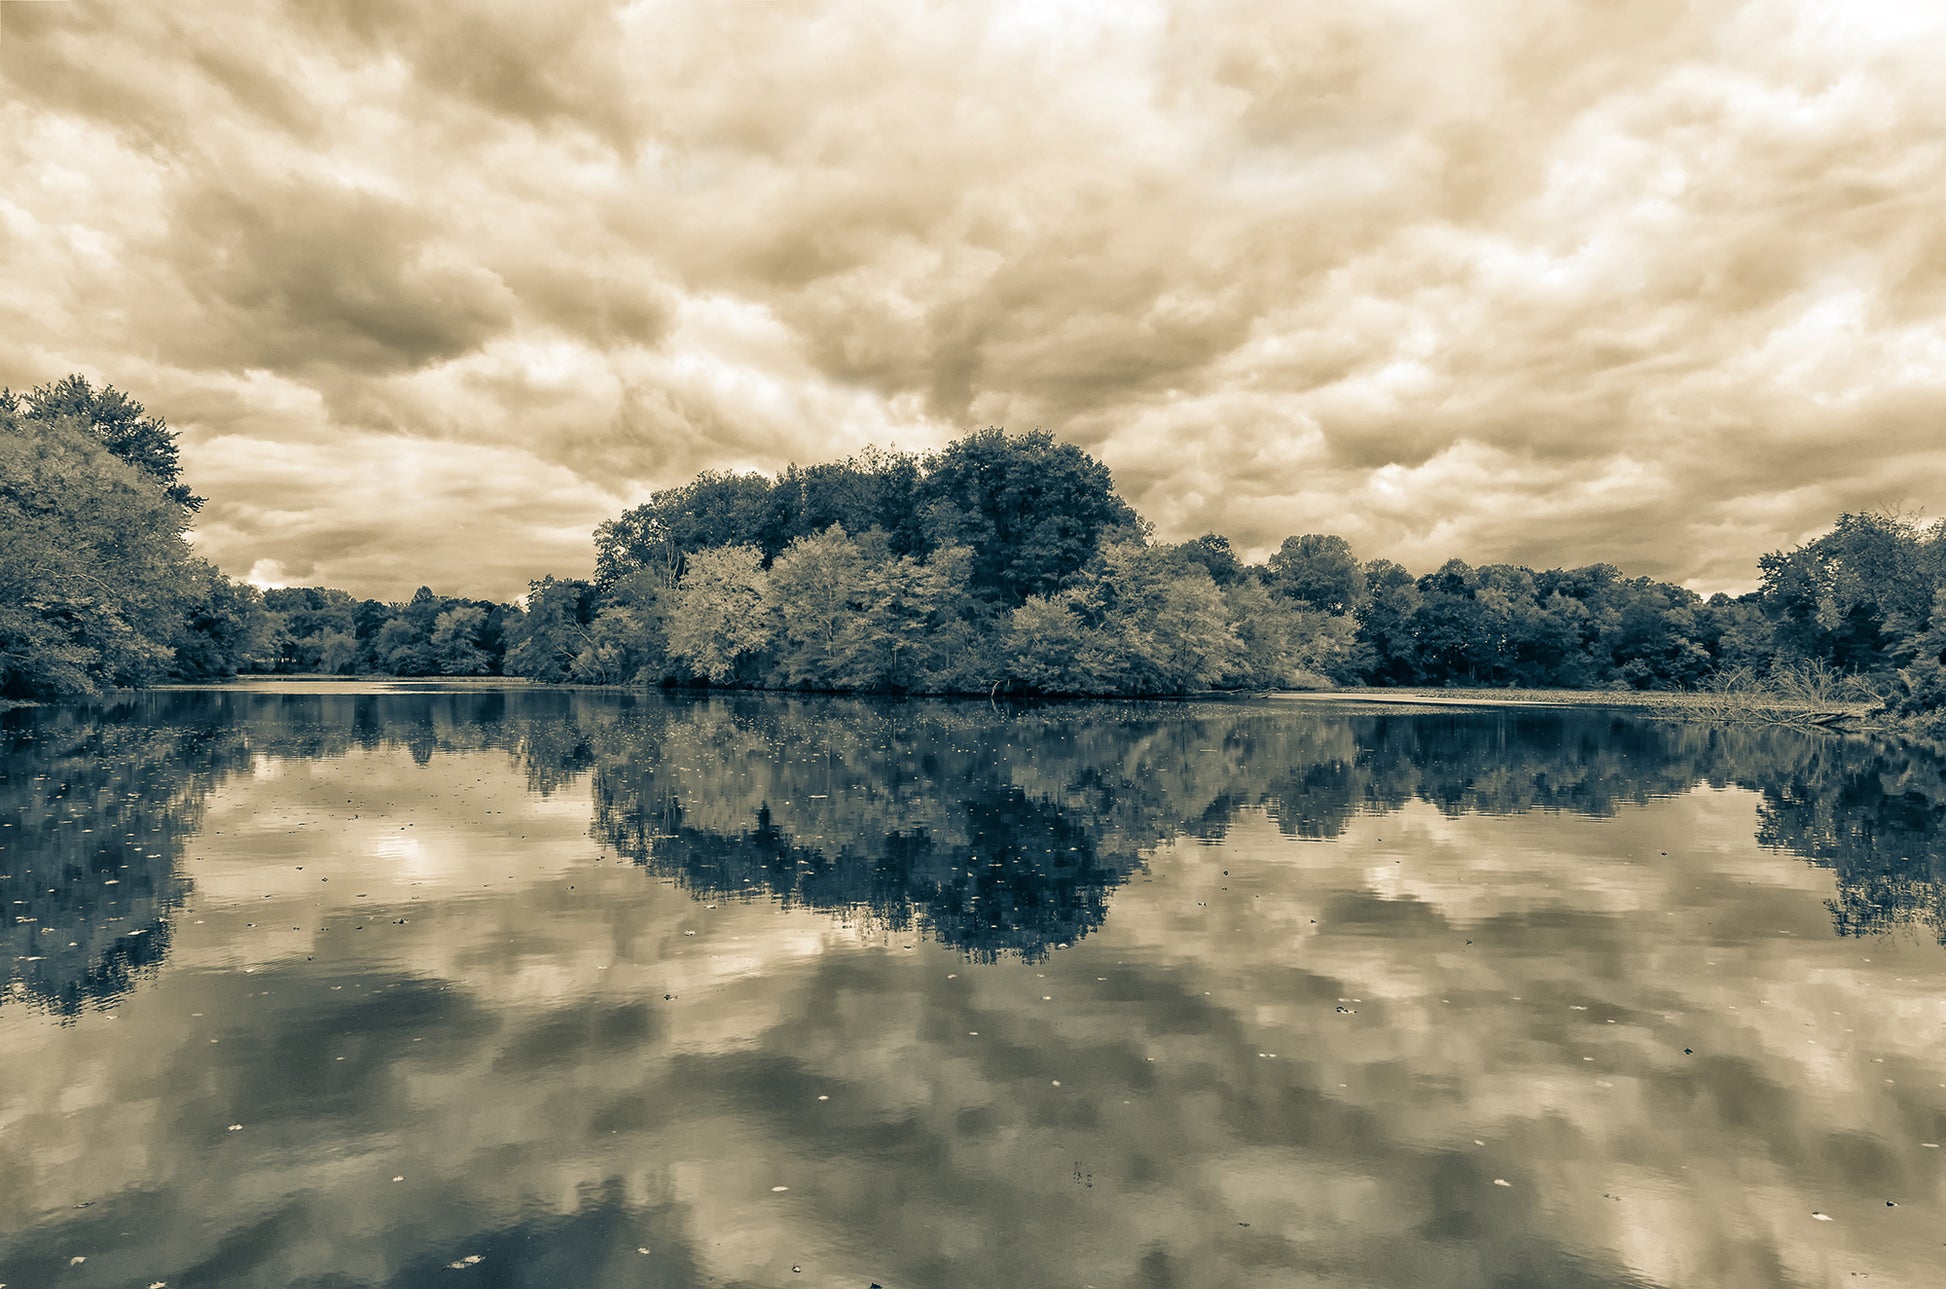 Prints For Wall Decor: Fall Trees on Edge of Pond With Stormy Sky Split Tone - Rural / Country Style Landscape / Nature Loose / Unframed / Frameless / Frameable Photograph Wall Art Print - Artwork